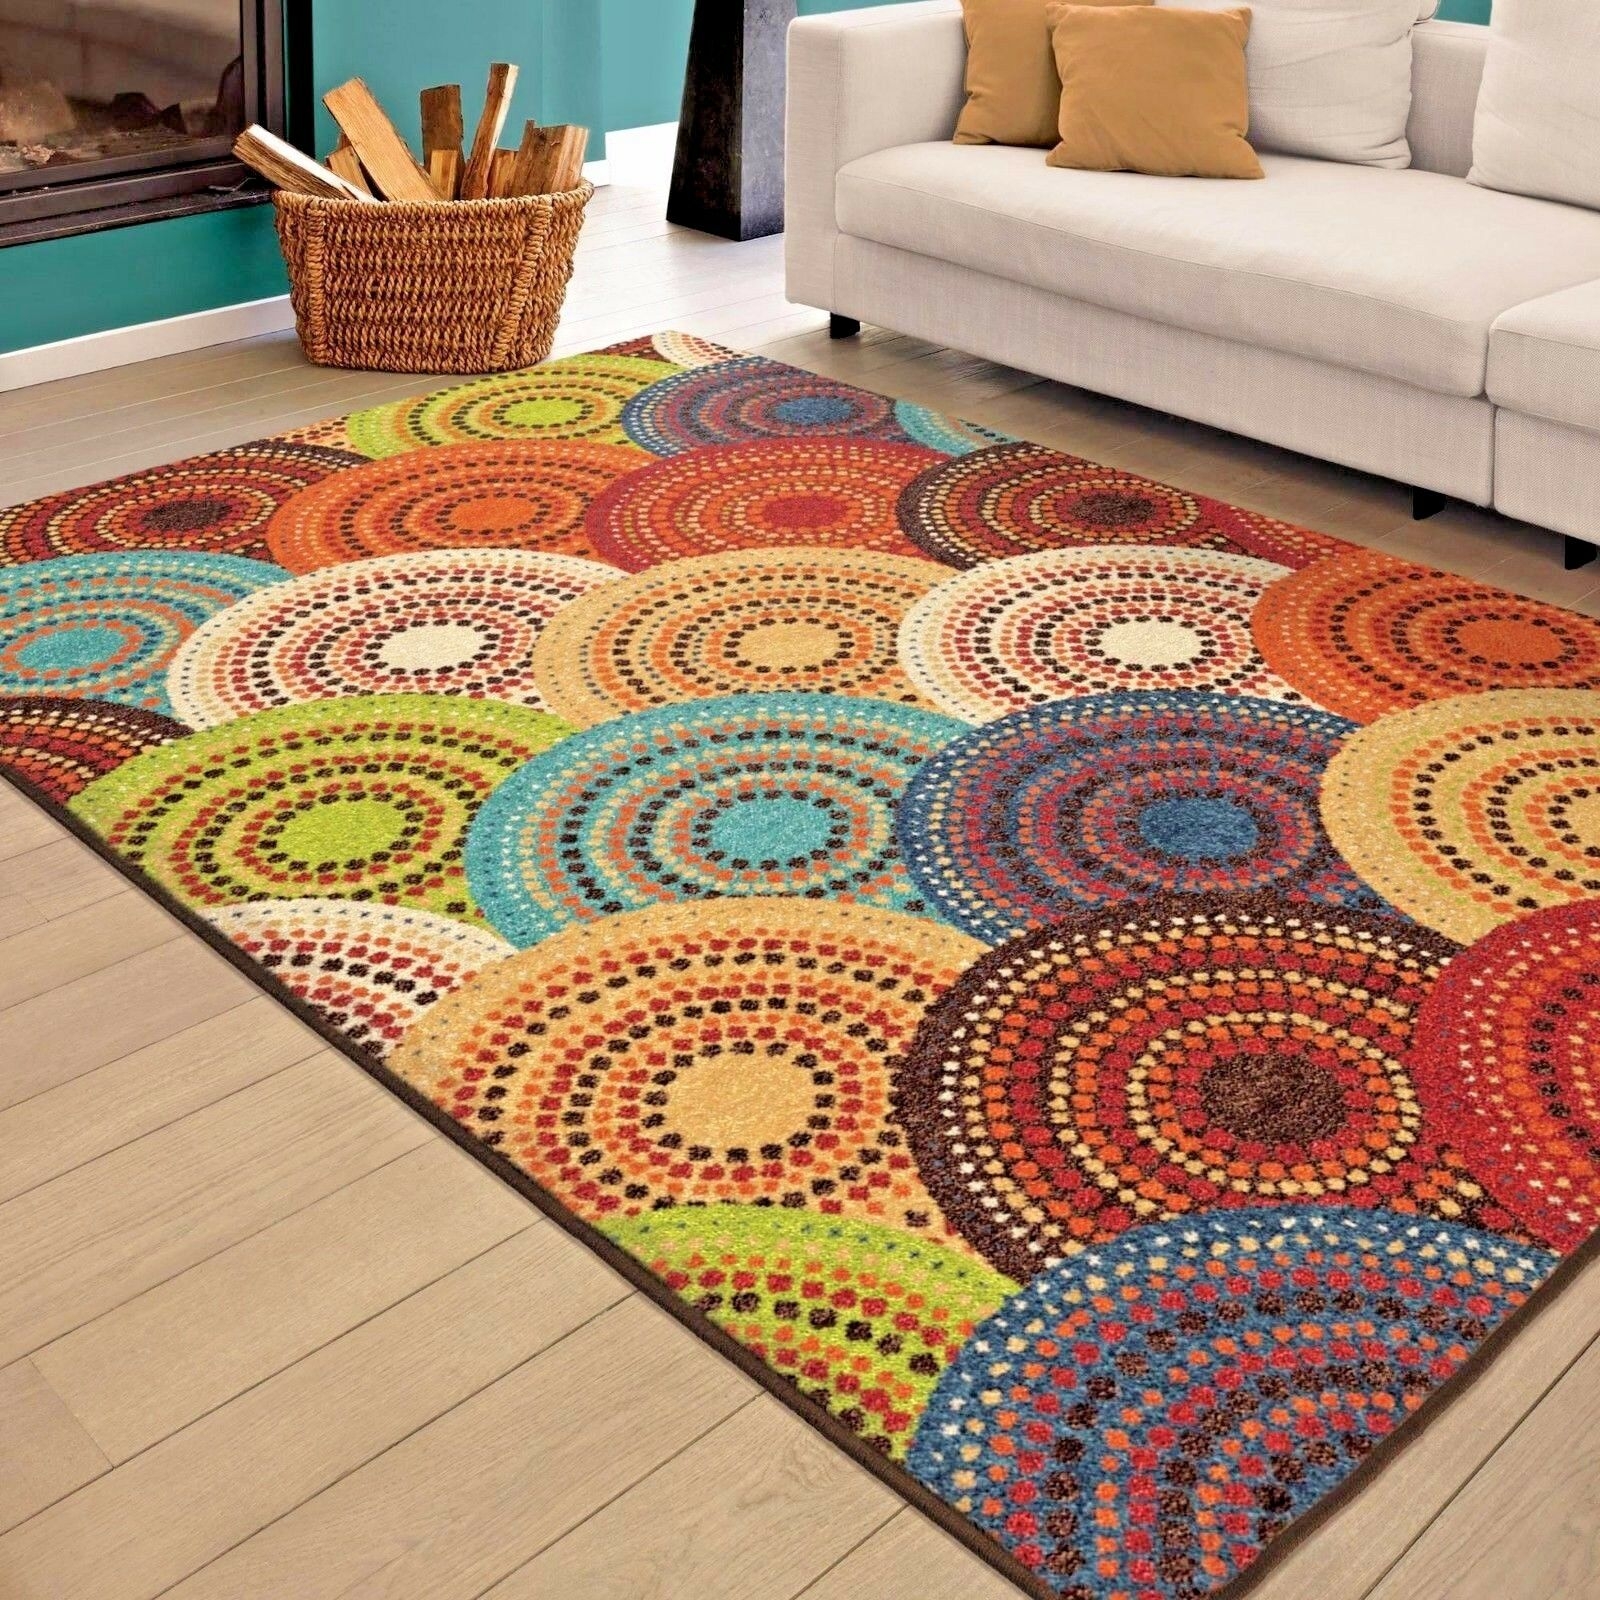 Colorful Rugs For Living Room Visualhunt, Area Rugs Bright Colors